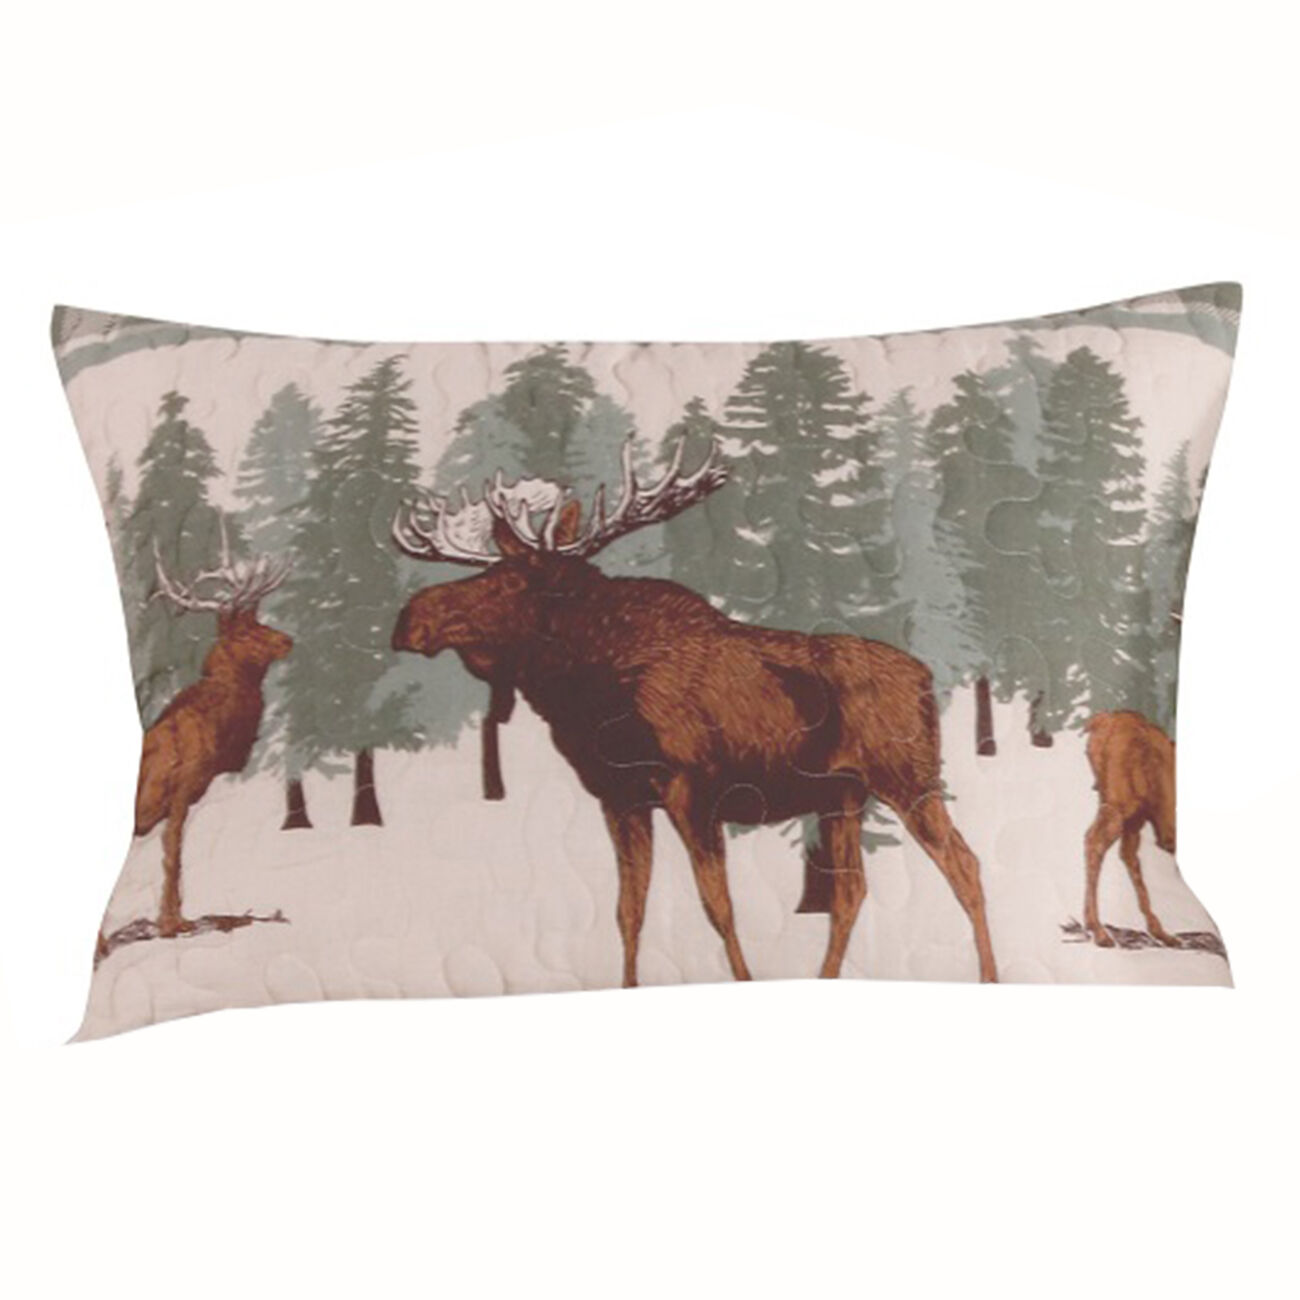 26 x 20 Fabric Pillow Sham with Animal and Tree Print, Green and Brown - BM223381